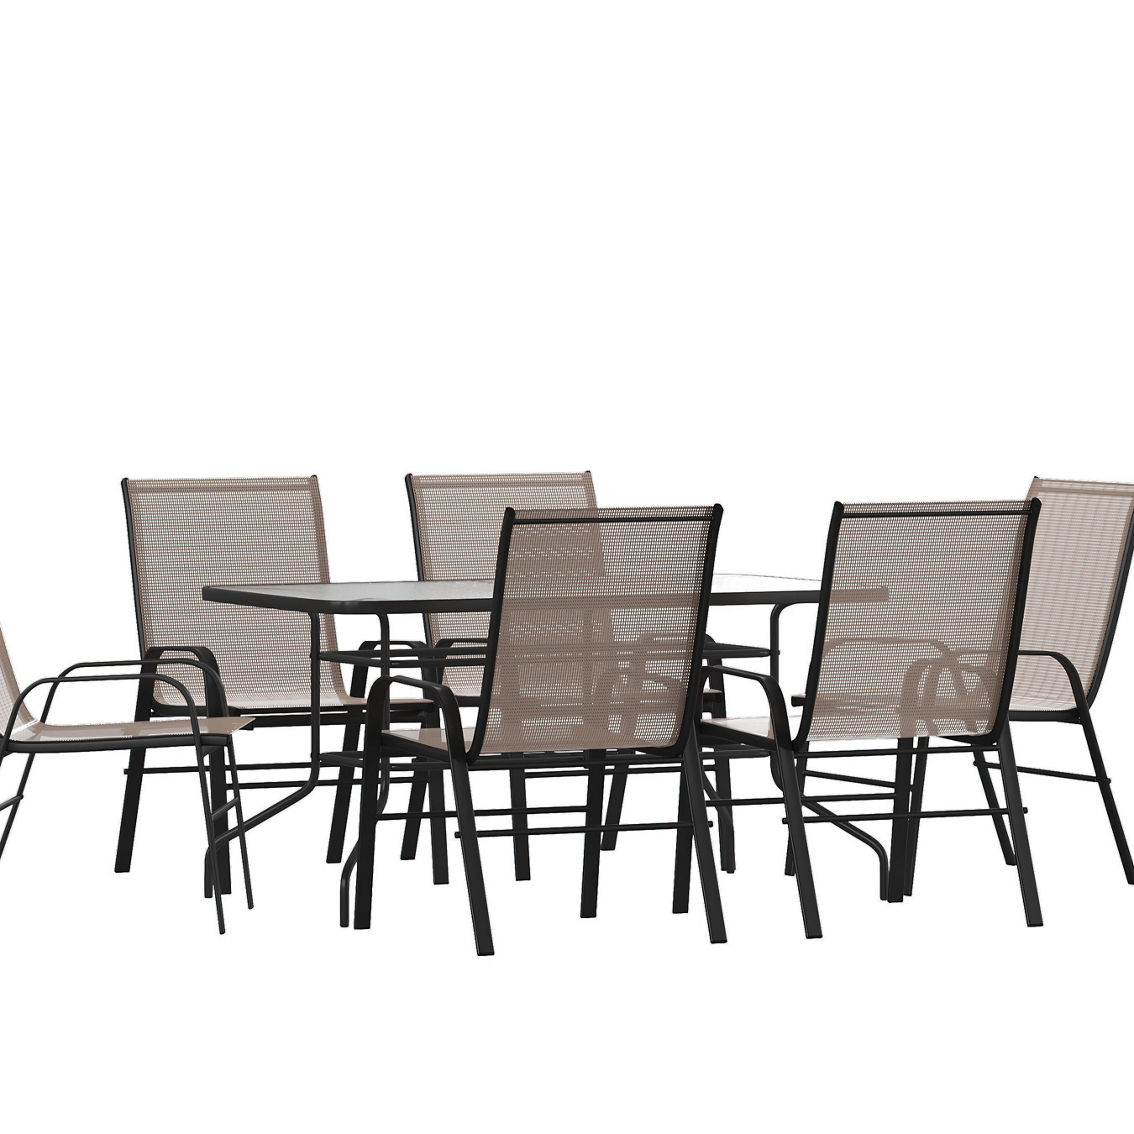 Flash Furniture 7PC Patio Set-Glass Table,6 Chairs - Image 2 of 5